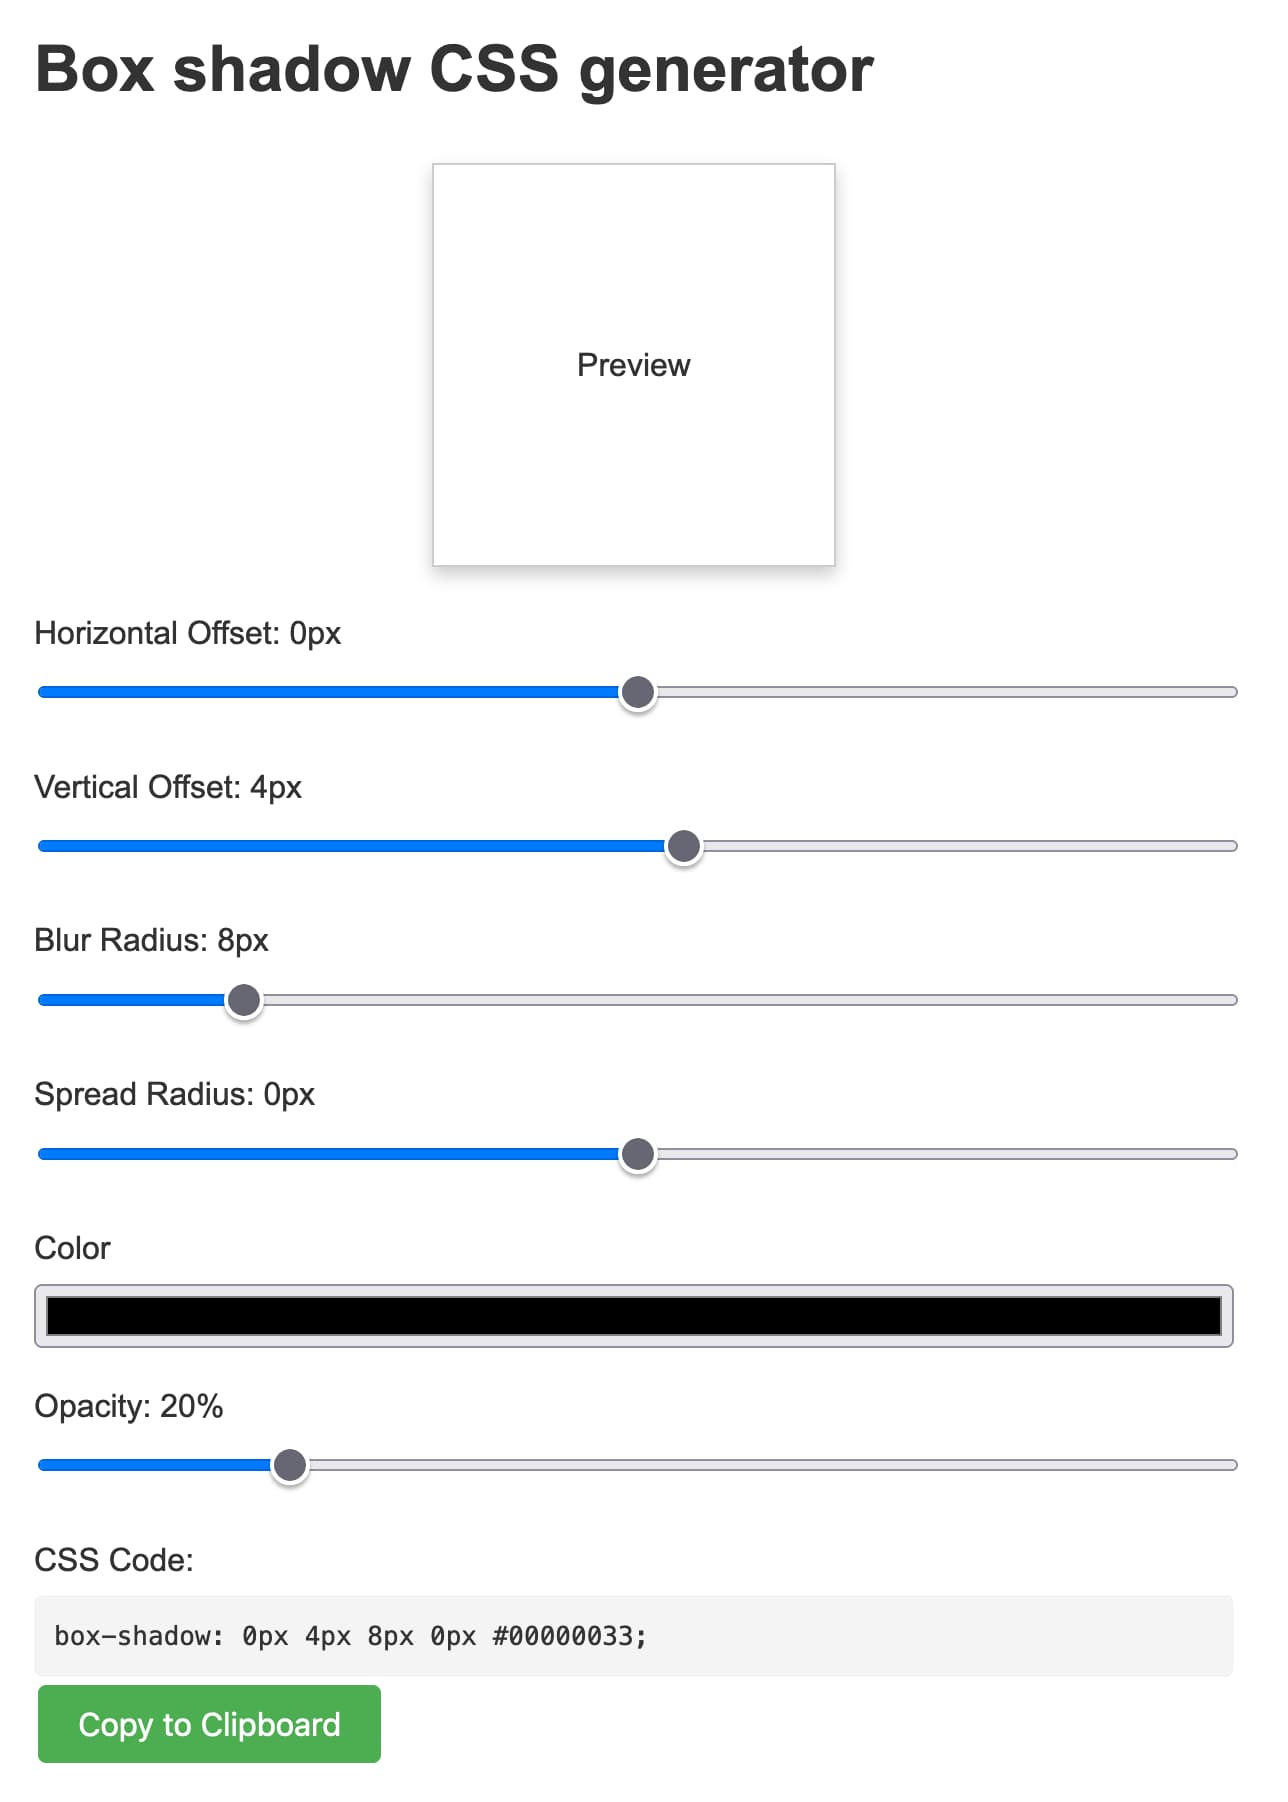 Box shadow CSS generator. Shows a preview, then provides sliders to set Horizontal Offset, Vertical Offset, Blur Radius,  Spread Radius,  Color and Opacity - plus the generated CSS and a Copy to Clipboard button